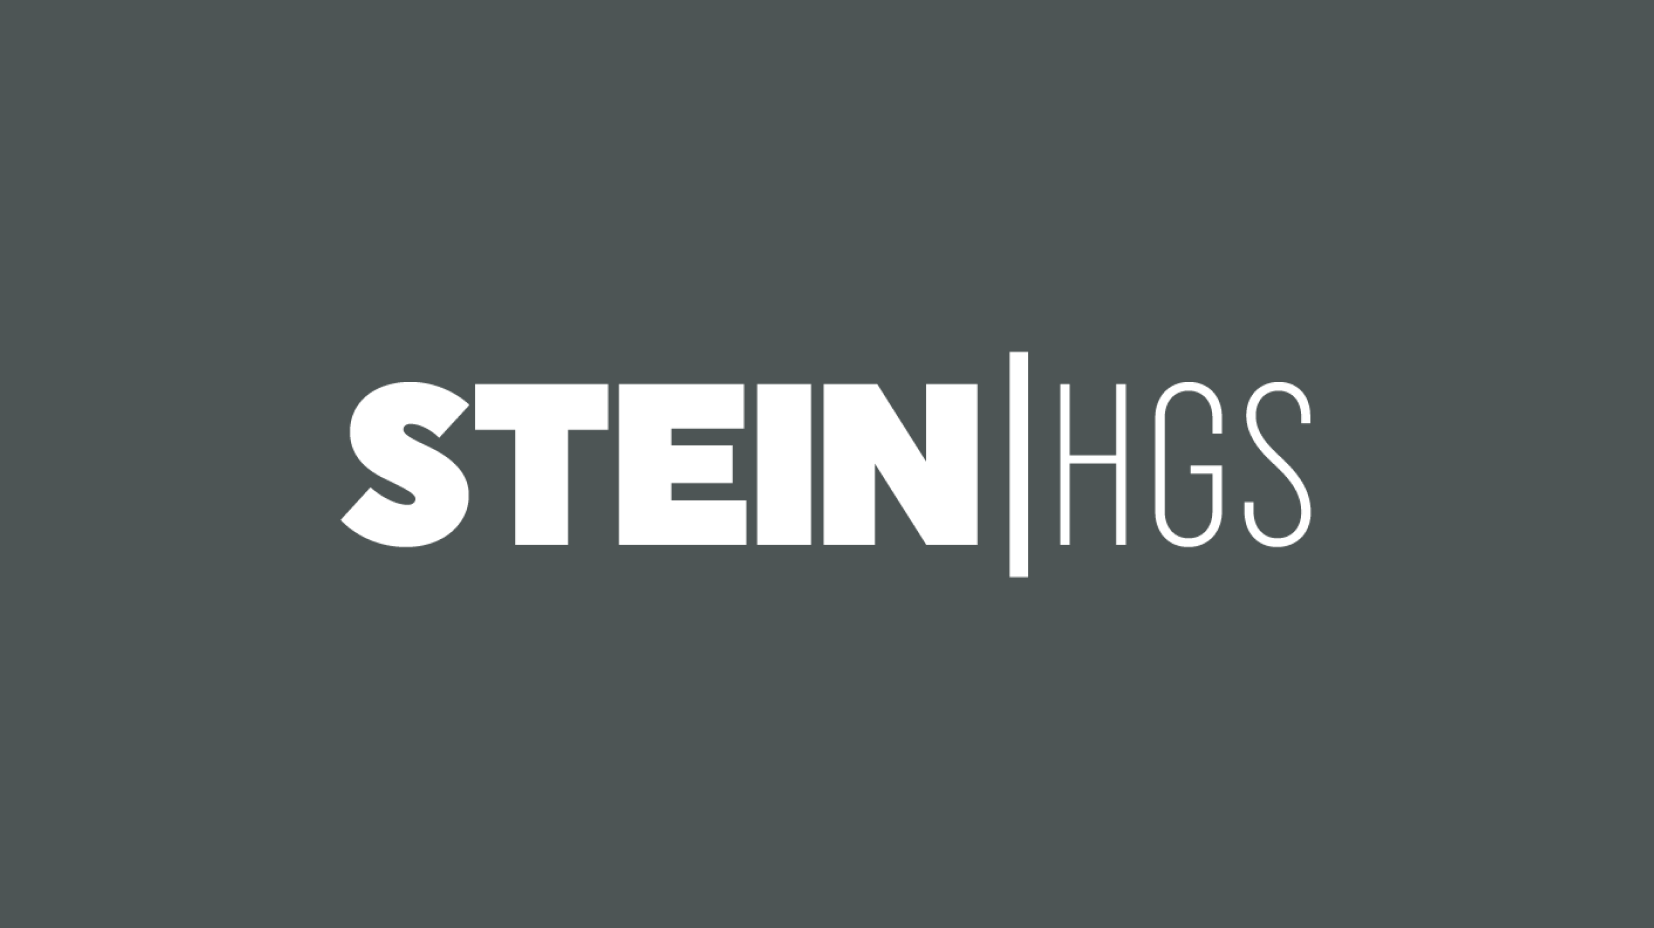 Tech & Product DD | Acquisition | Code & Co. advises IK Partners on Stein HGS